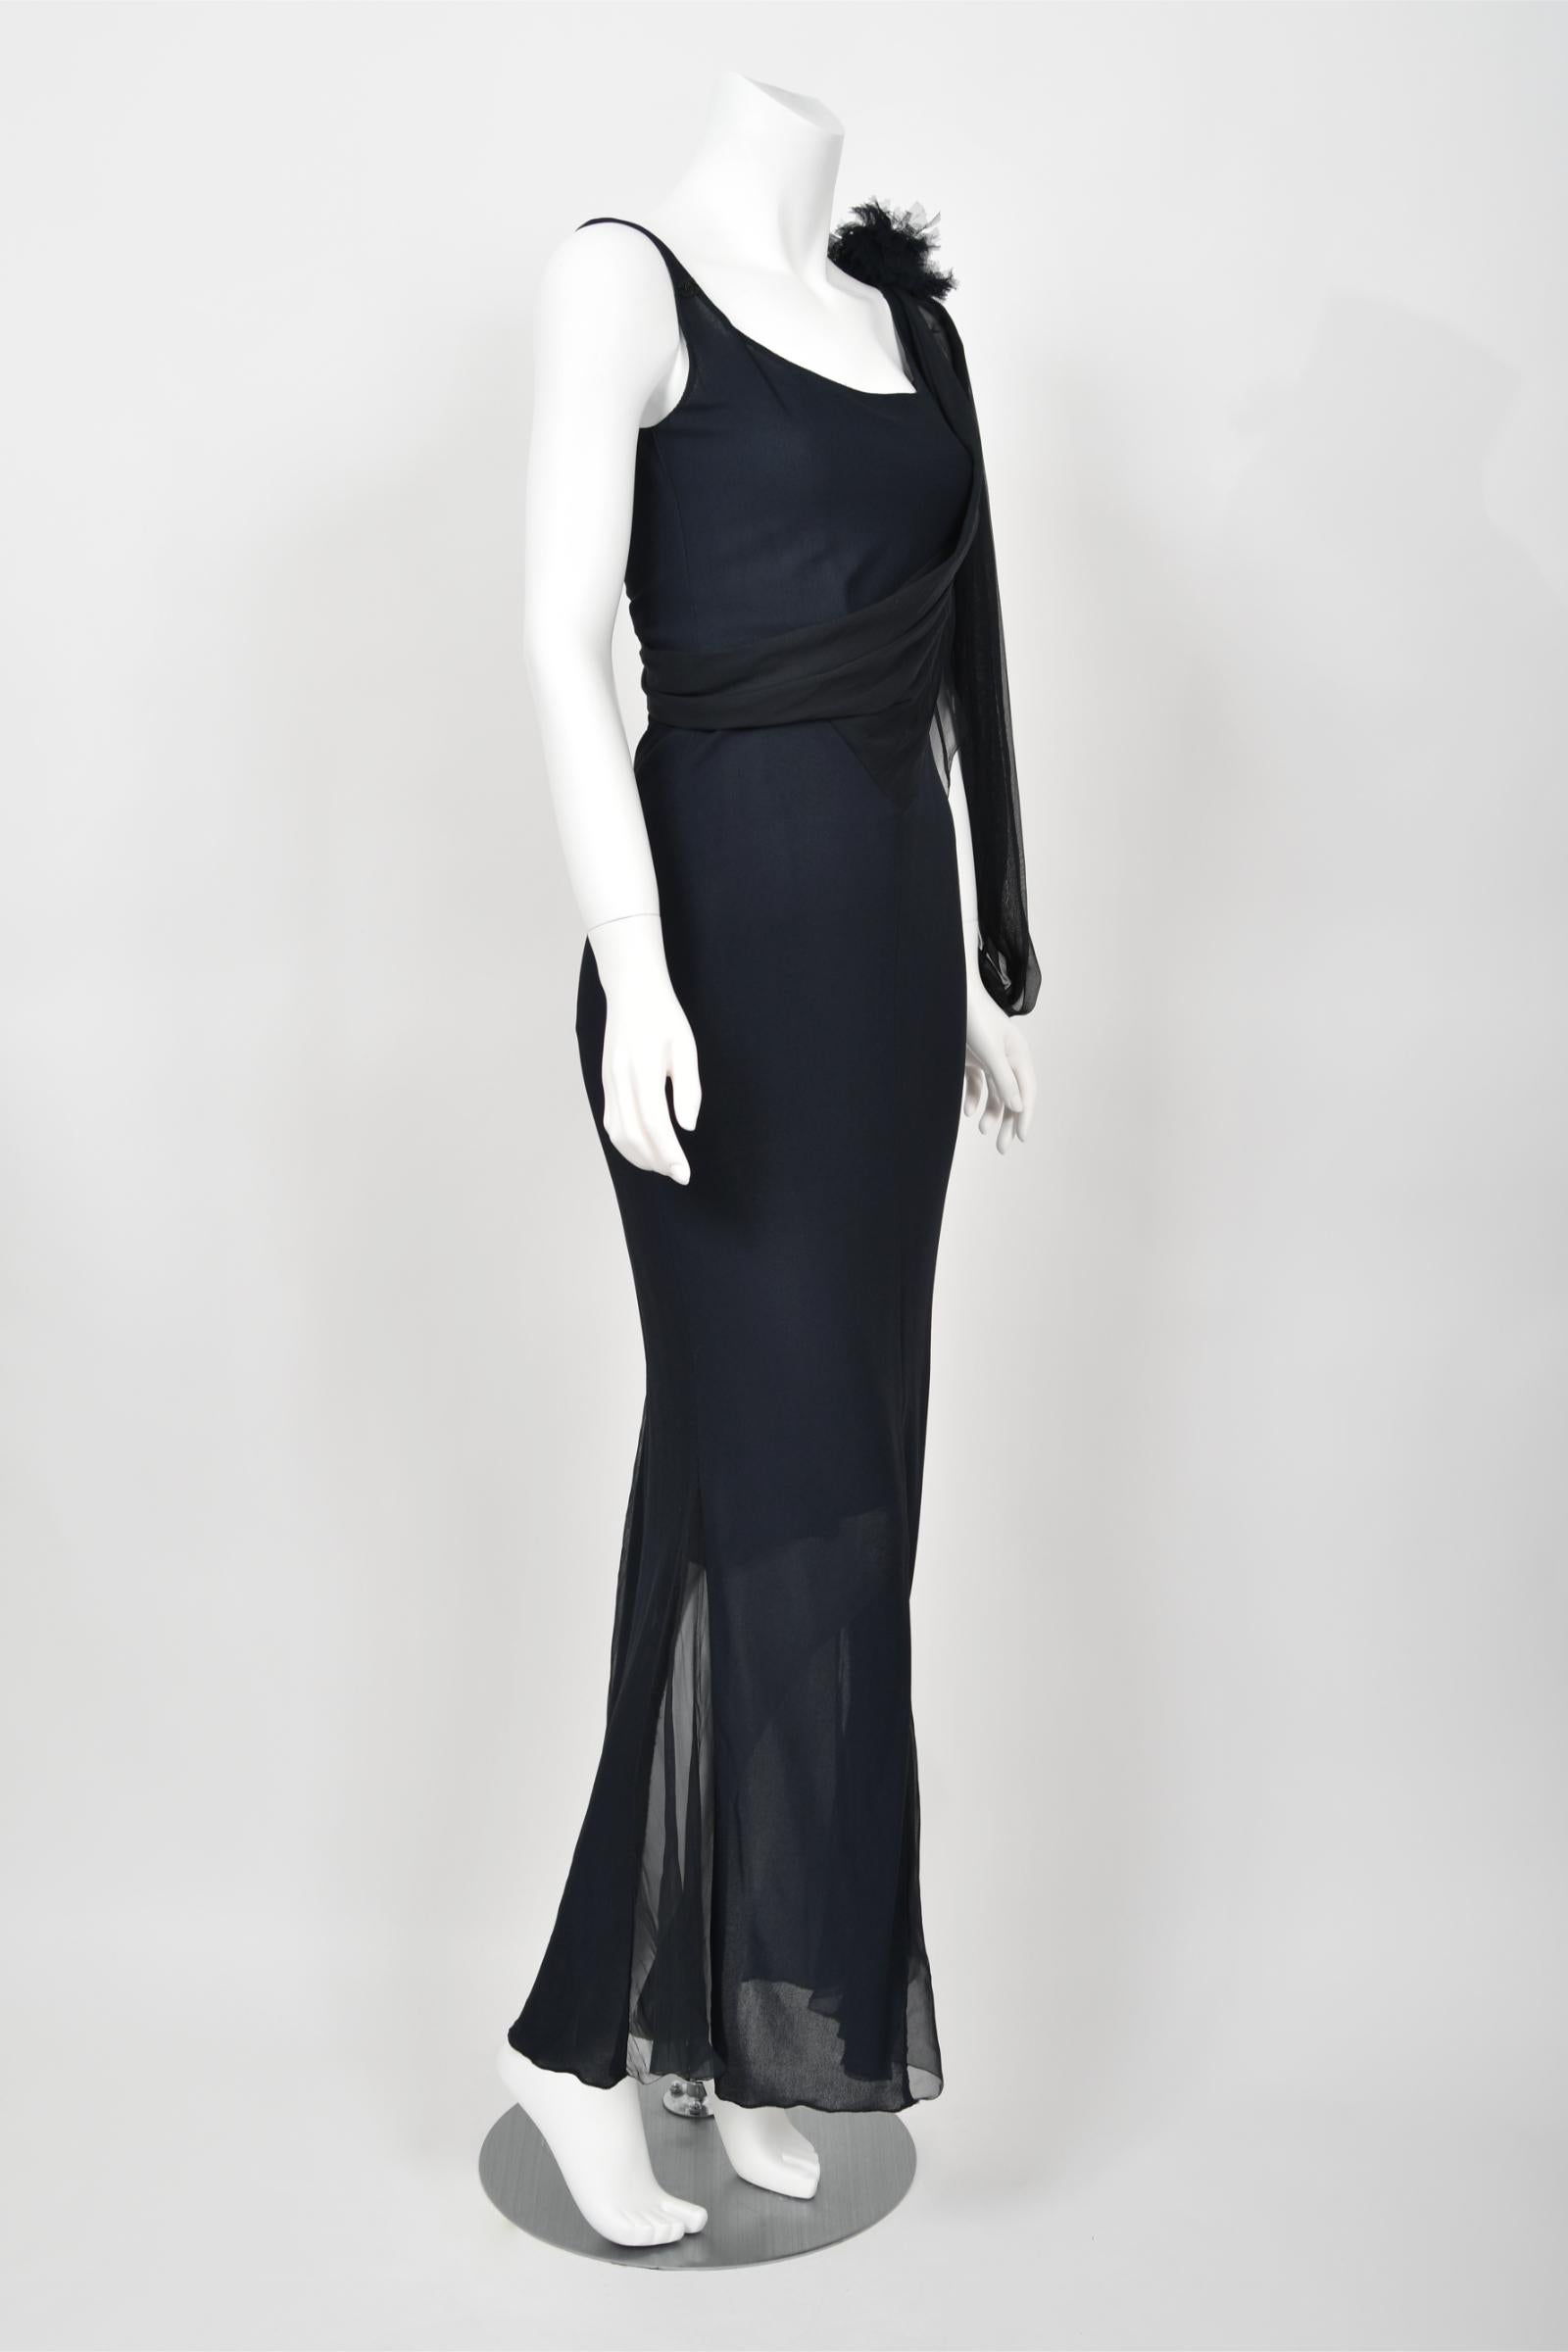 2002 Chanel Cruise Collection Midnight Blue Silk Chiffon Draped Bias-Cut Gown For Sale 8